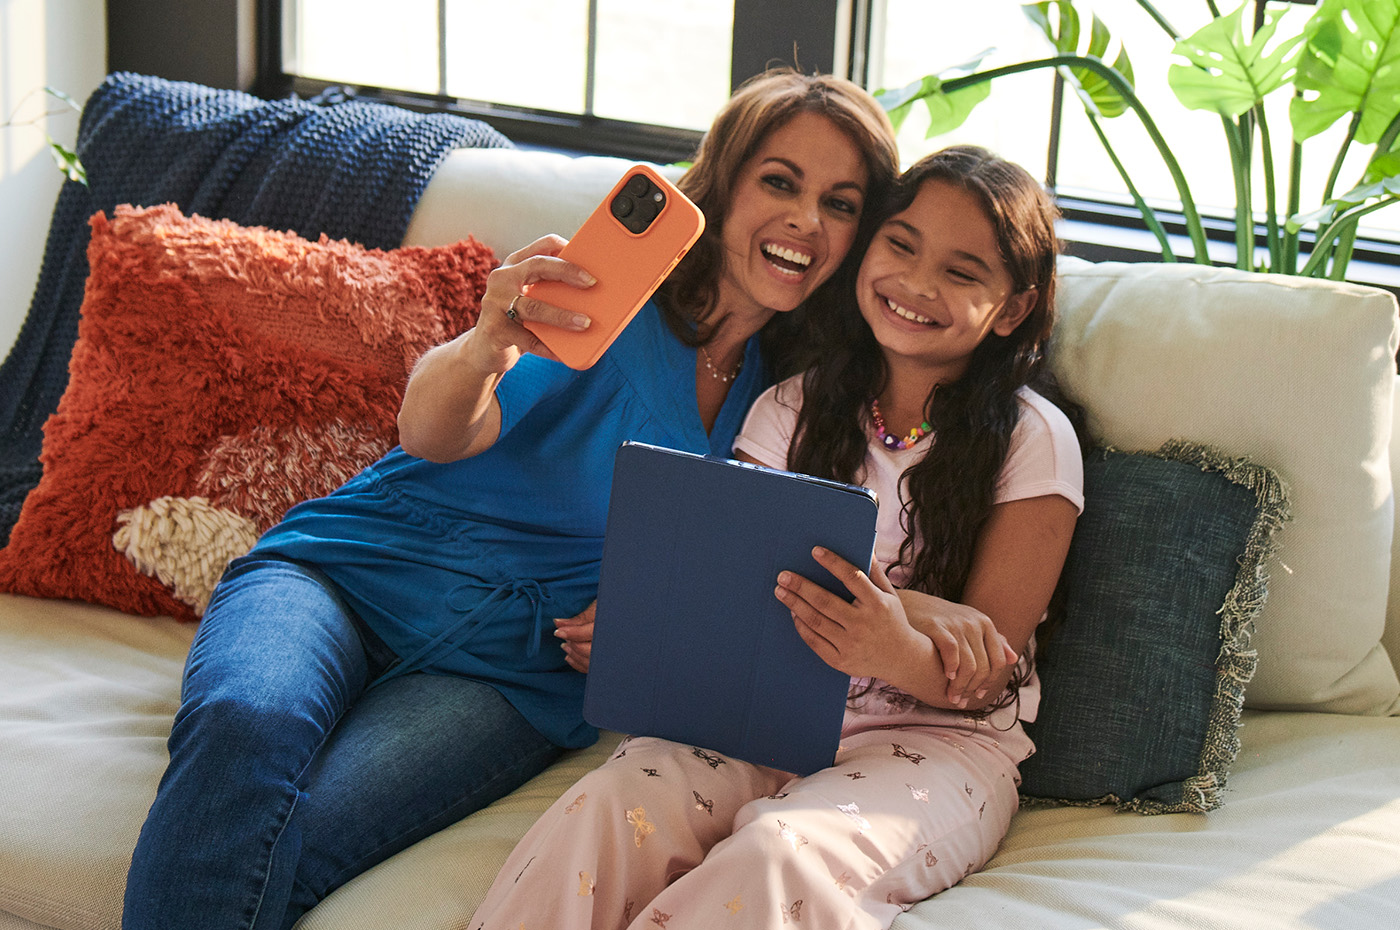 A mother and daughter smile on the couch as one takes a selfie with a phone and the other holds an iPad, both powered by Optimum Internet